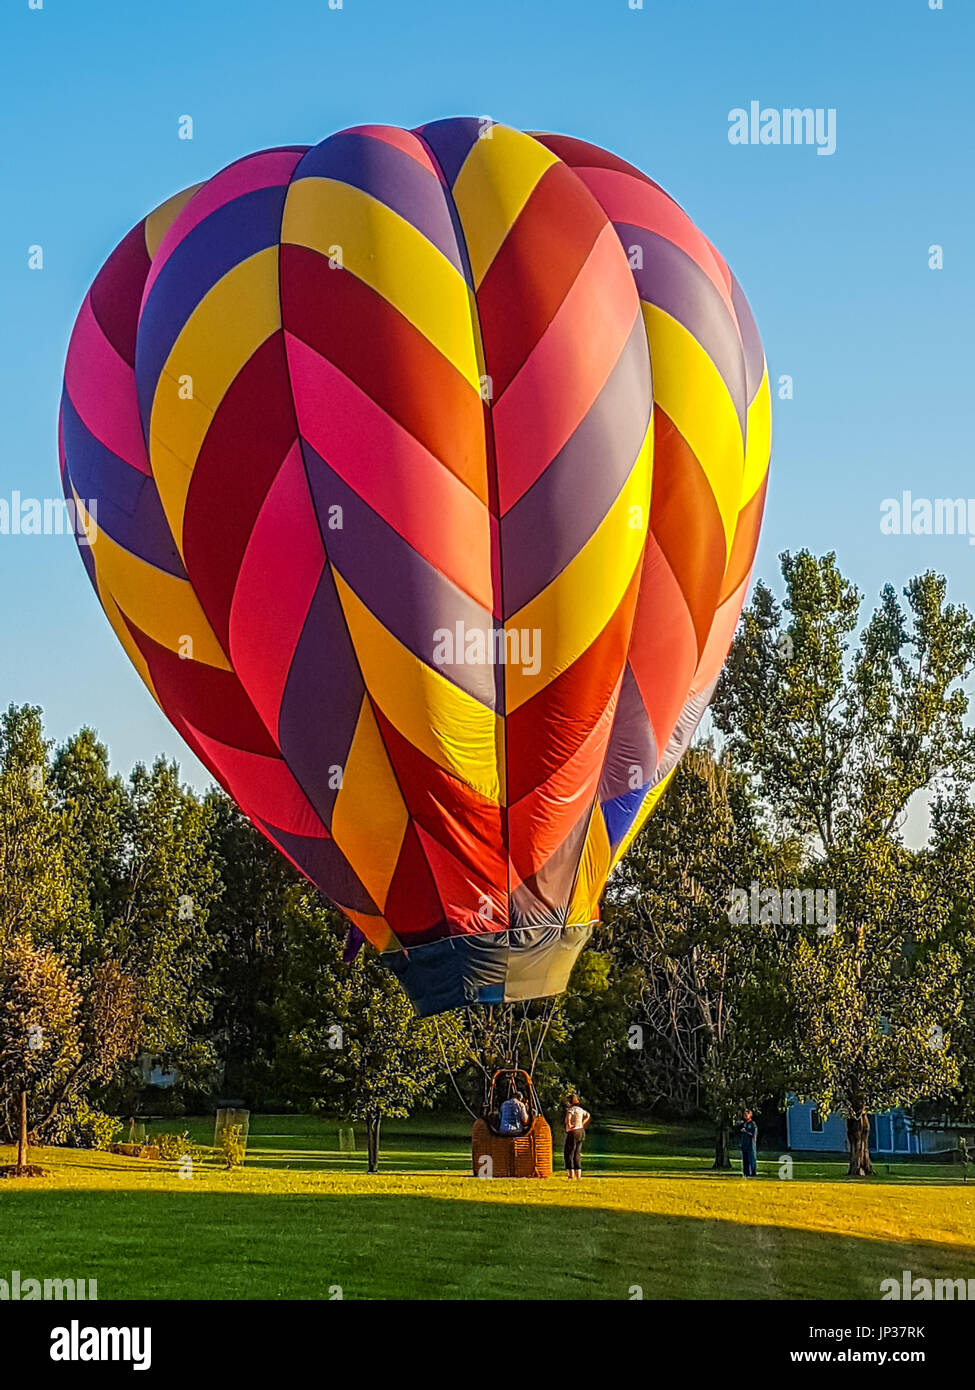 Hot air balloon landing on the lawn in a residential area: houses in the background; Missouri, Midwest Stock Photo